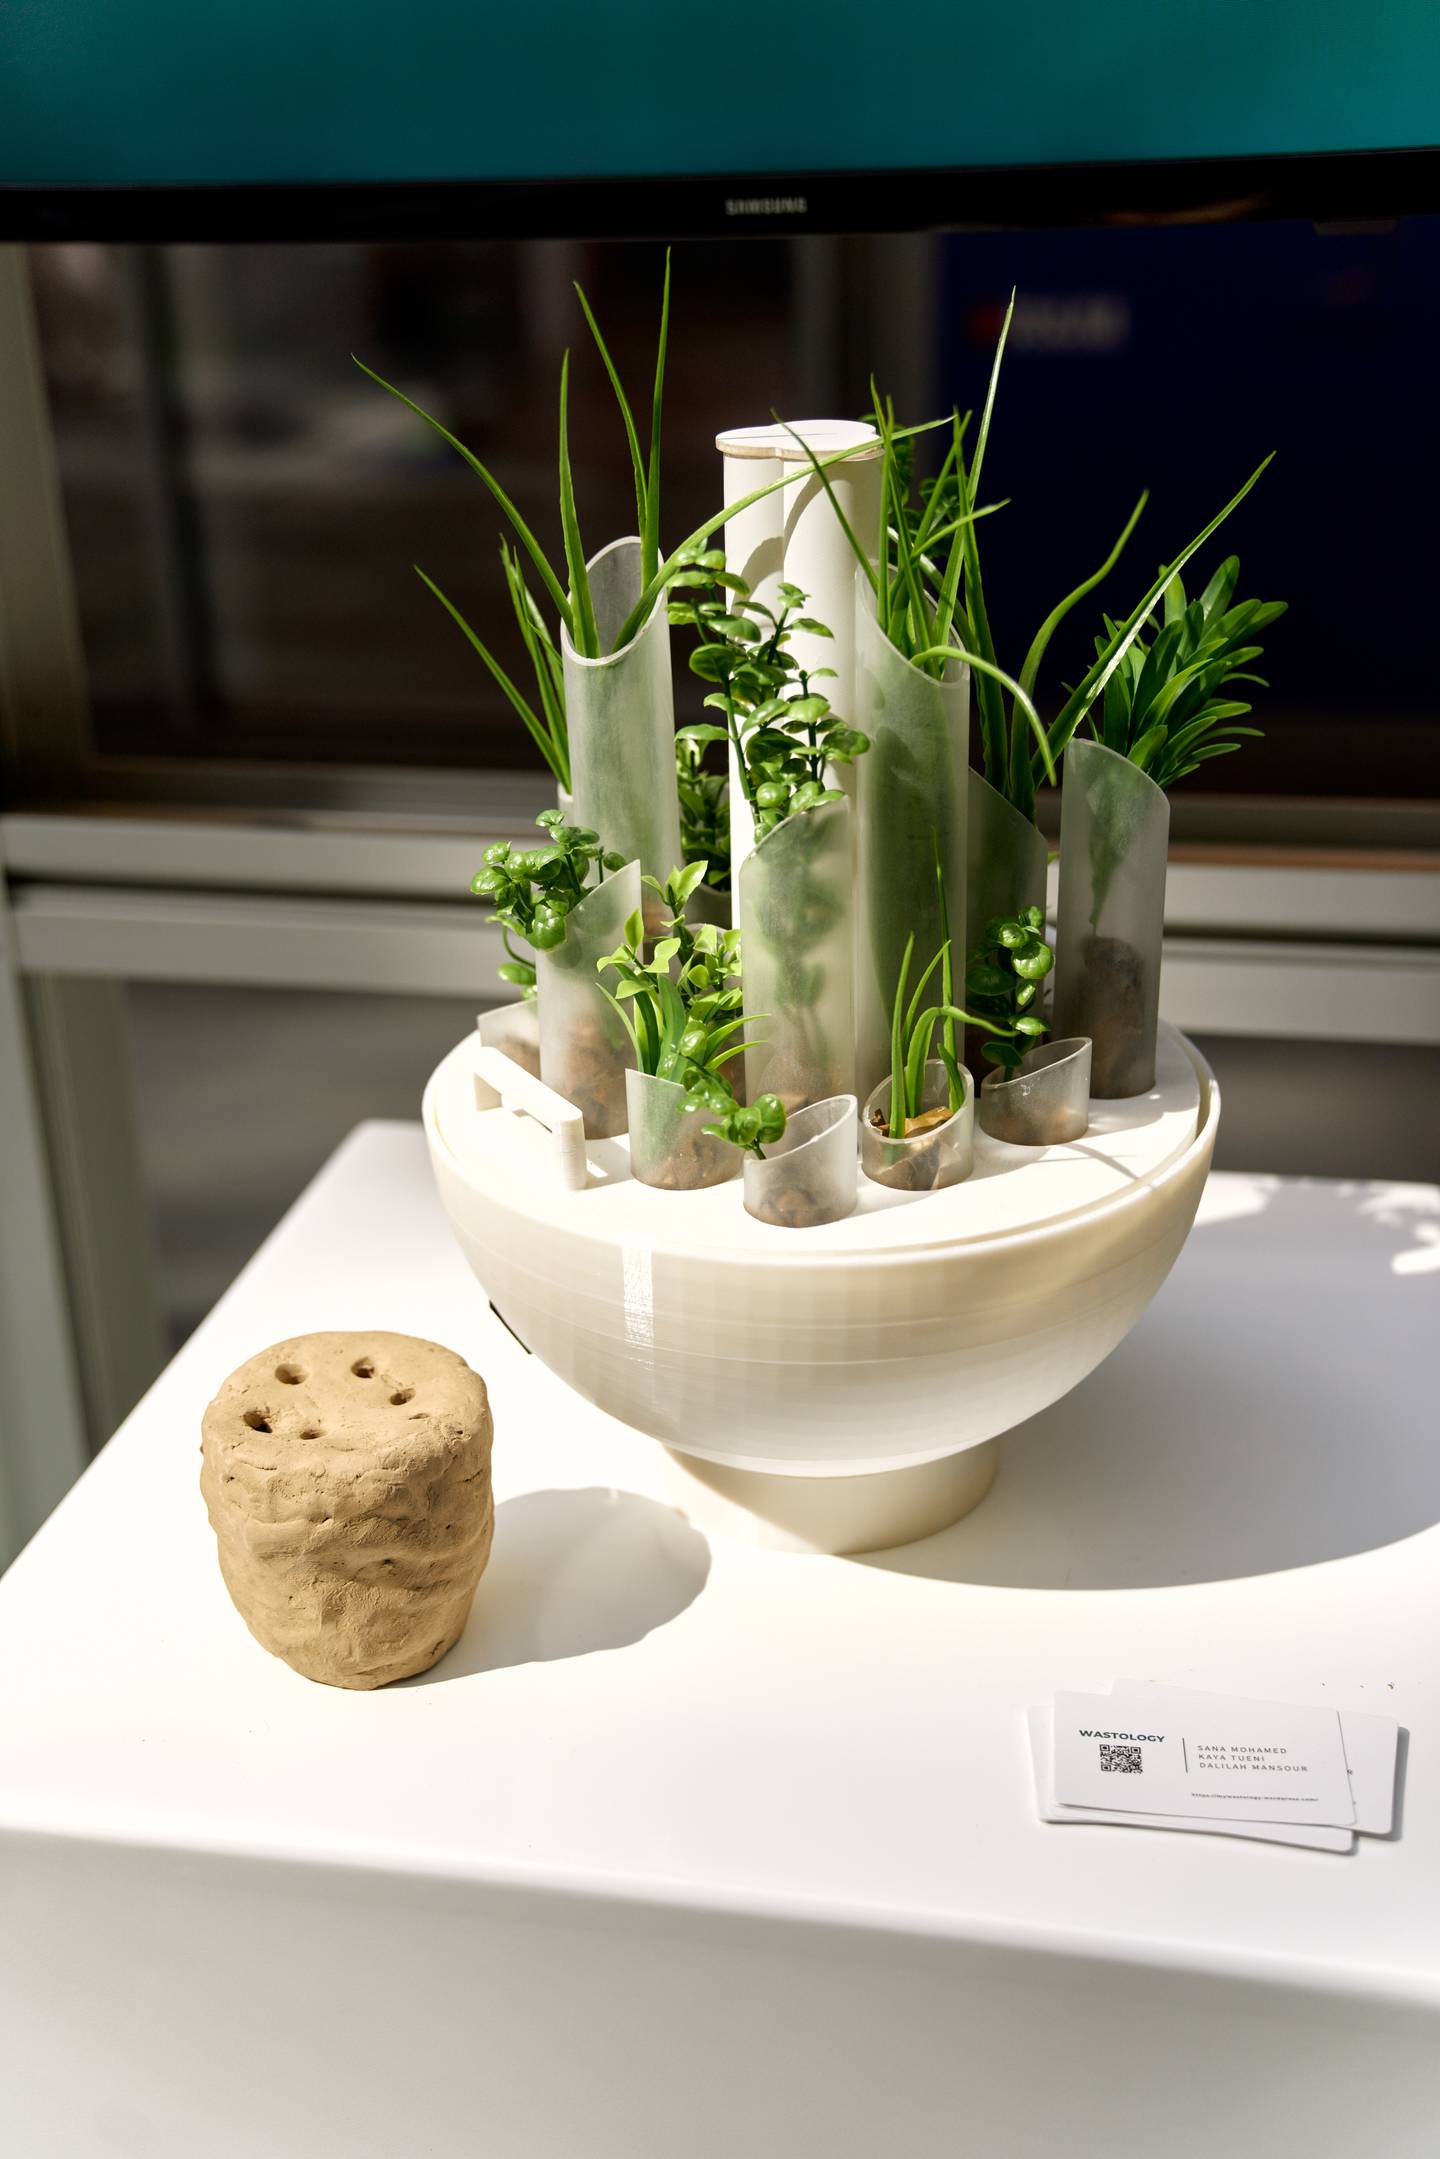 Wastology is a circular composting device with an app. Photo: Didi